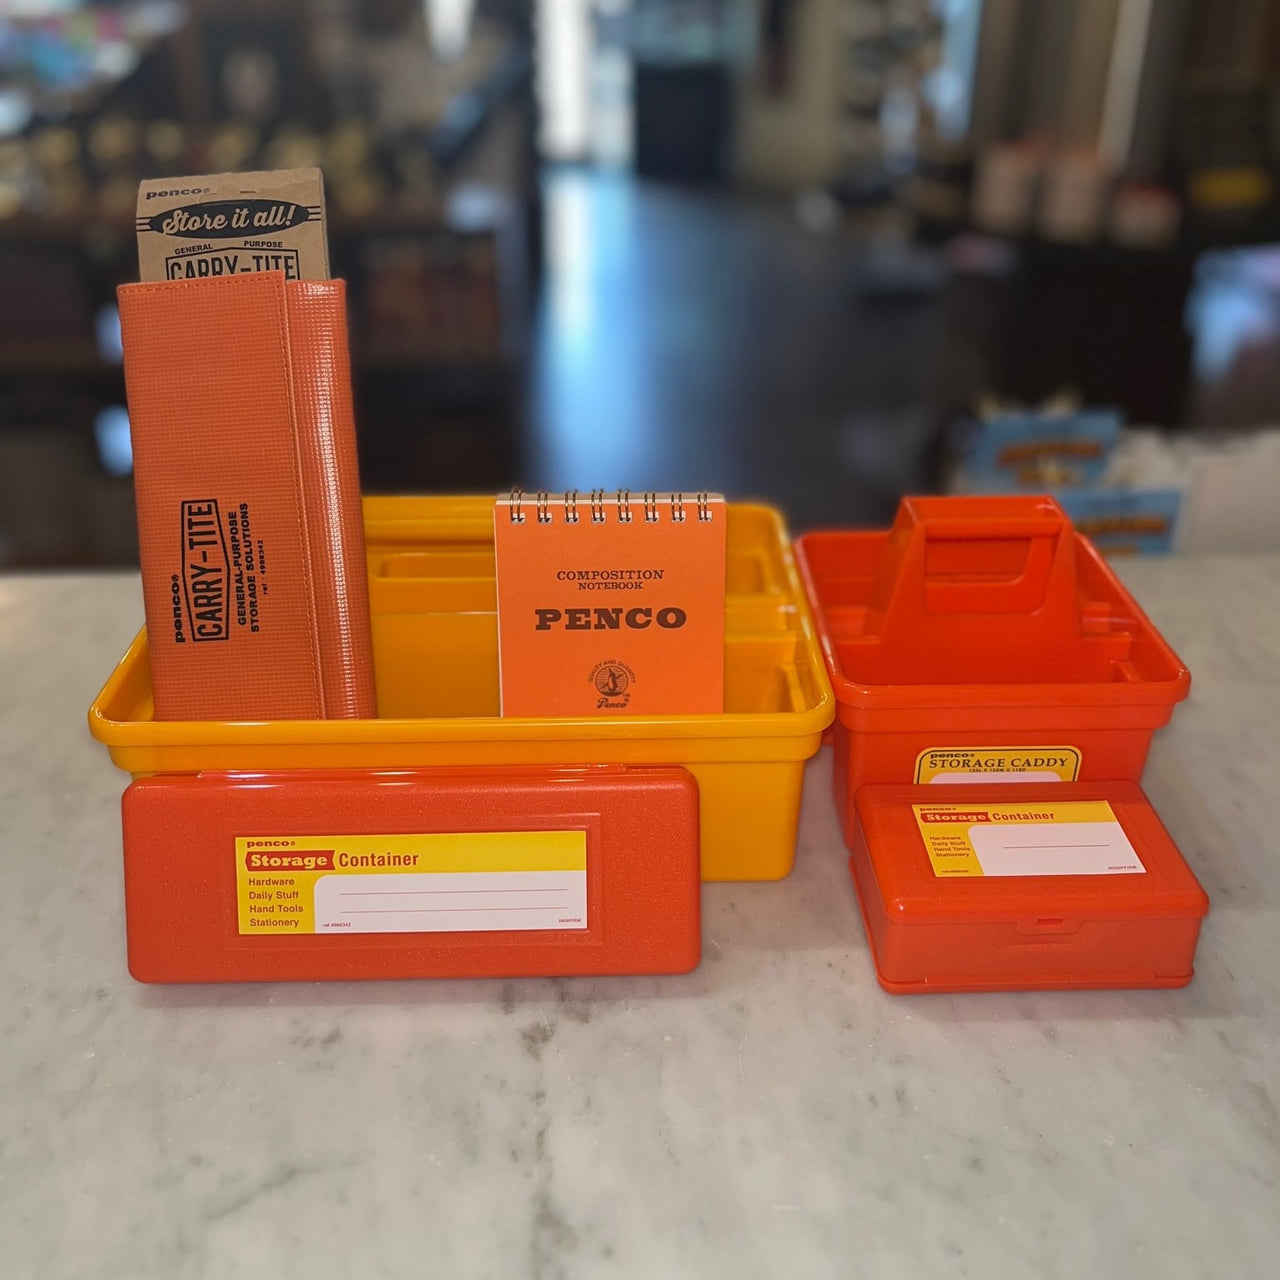 Storage Container Double-sided  | Orange